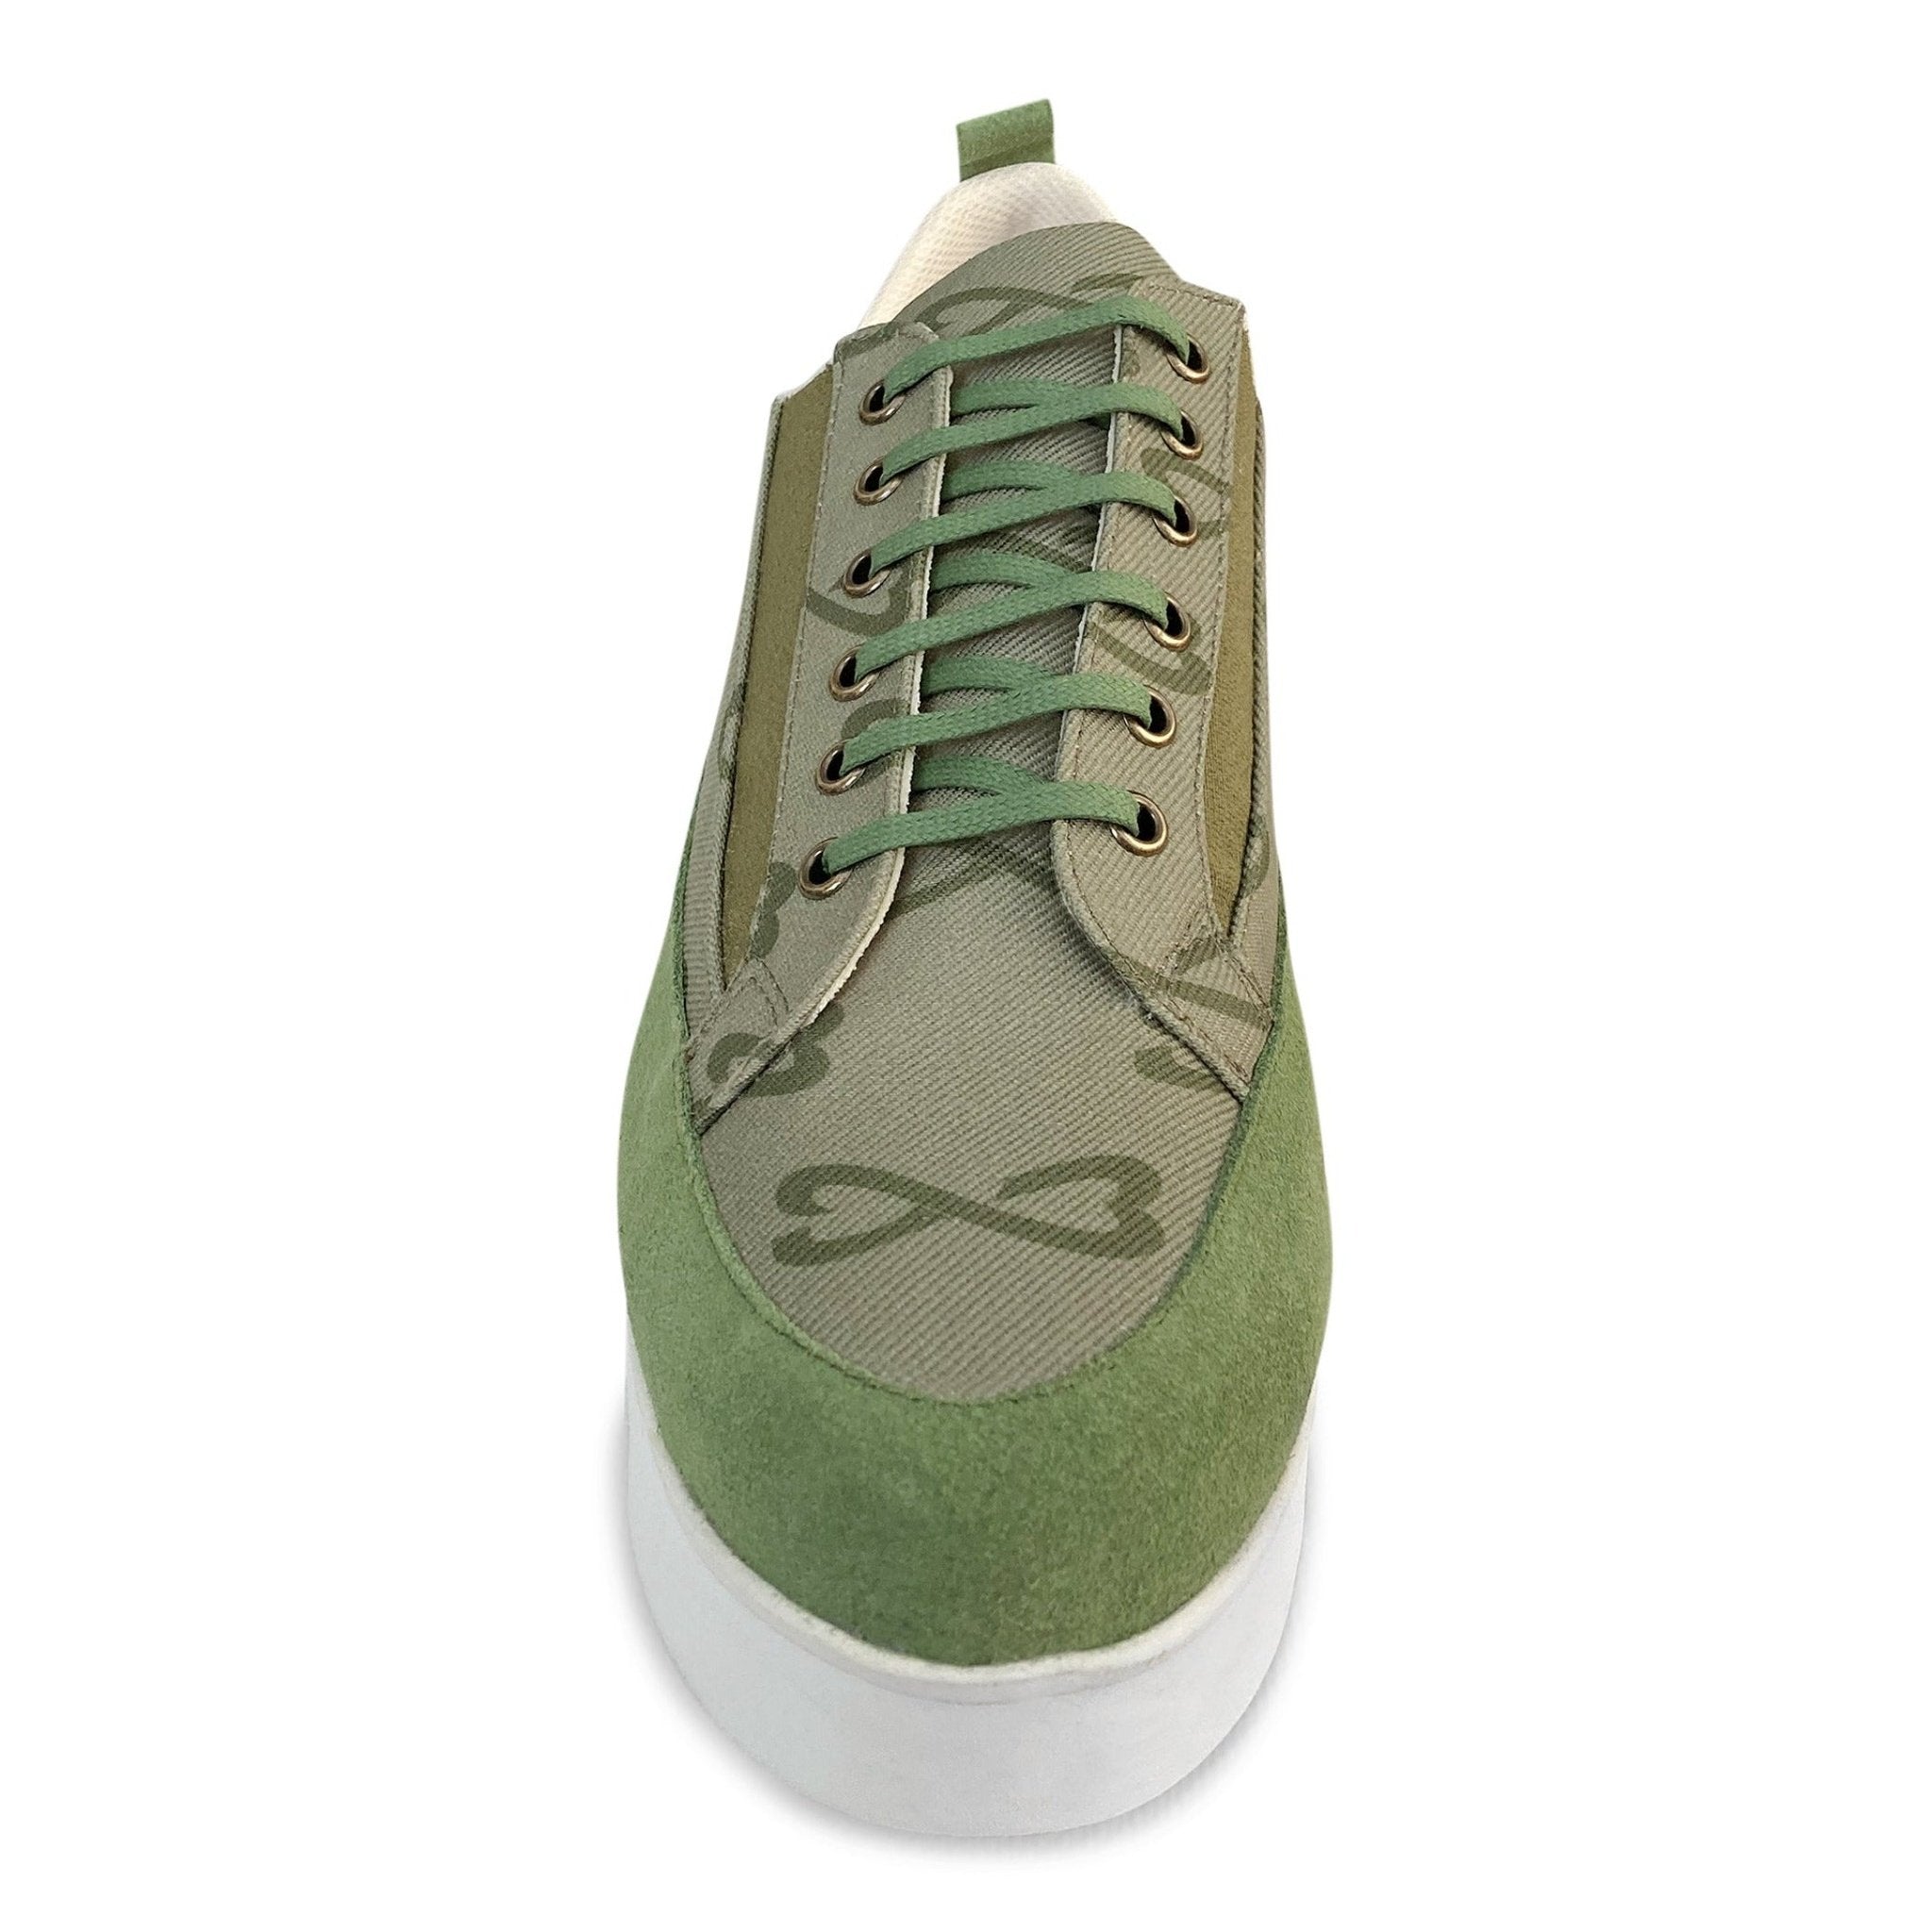 green canvas suede sneaker large sizes front